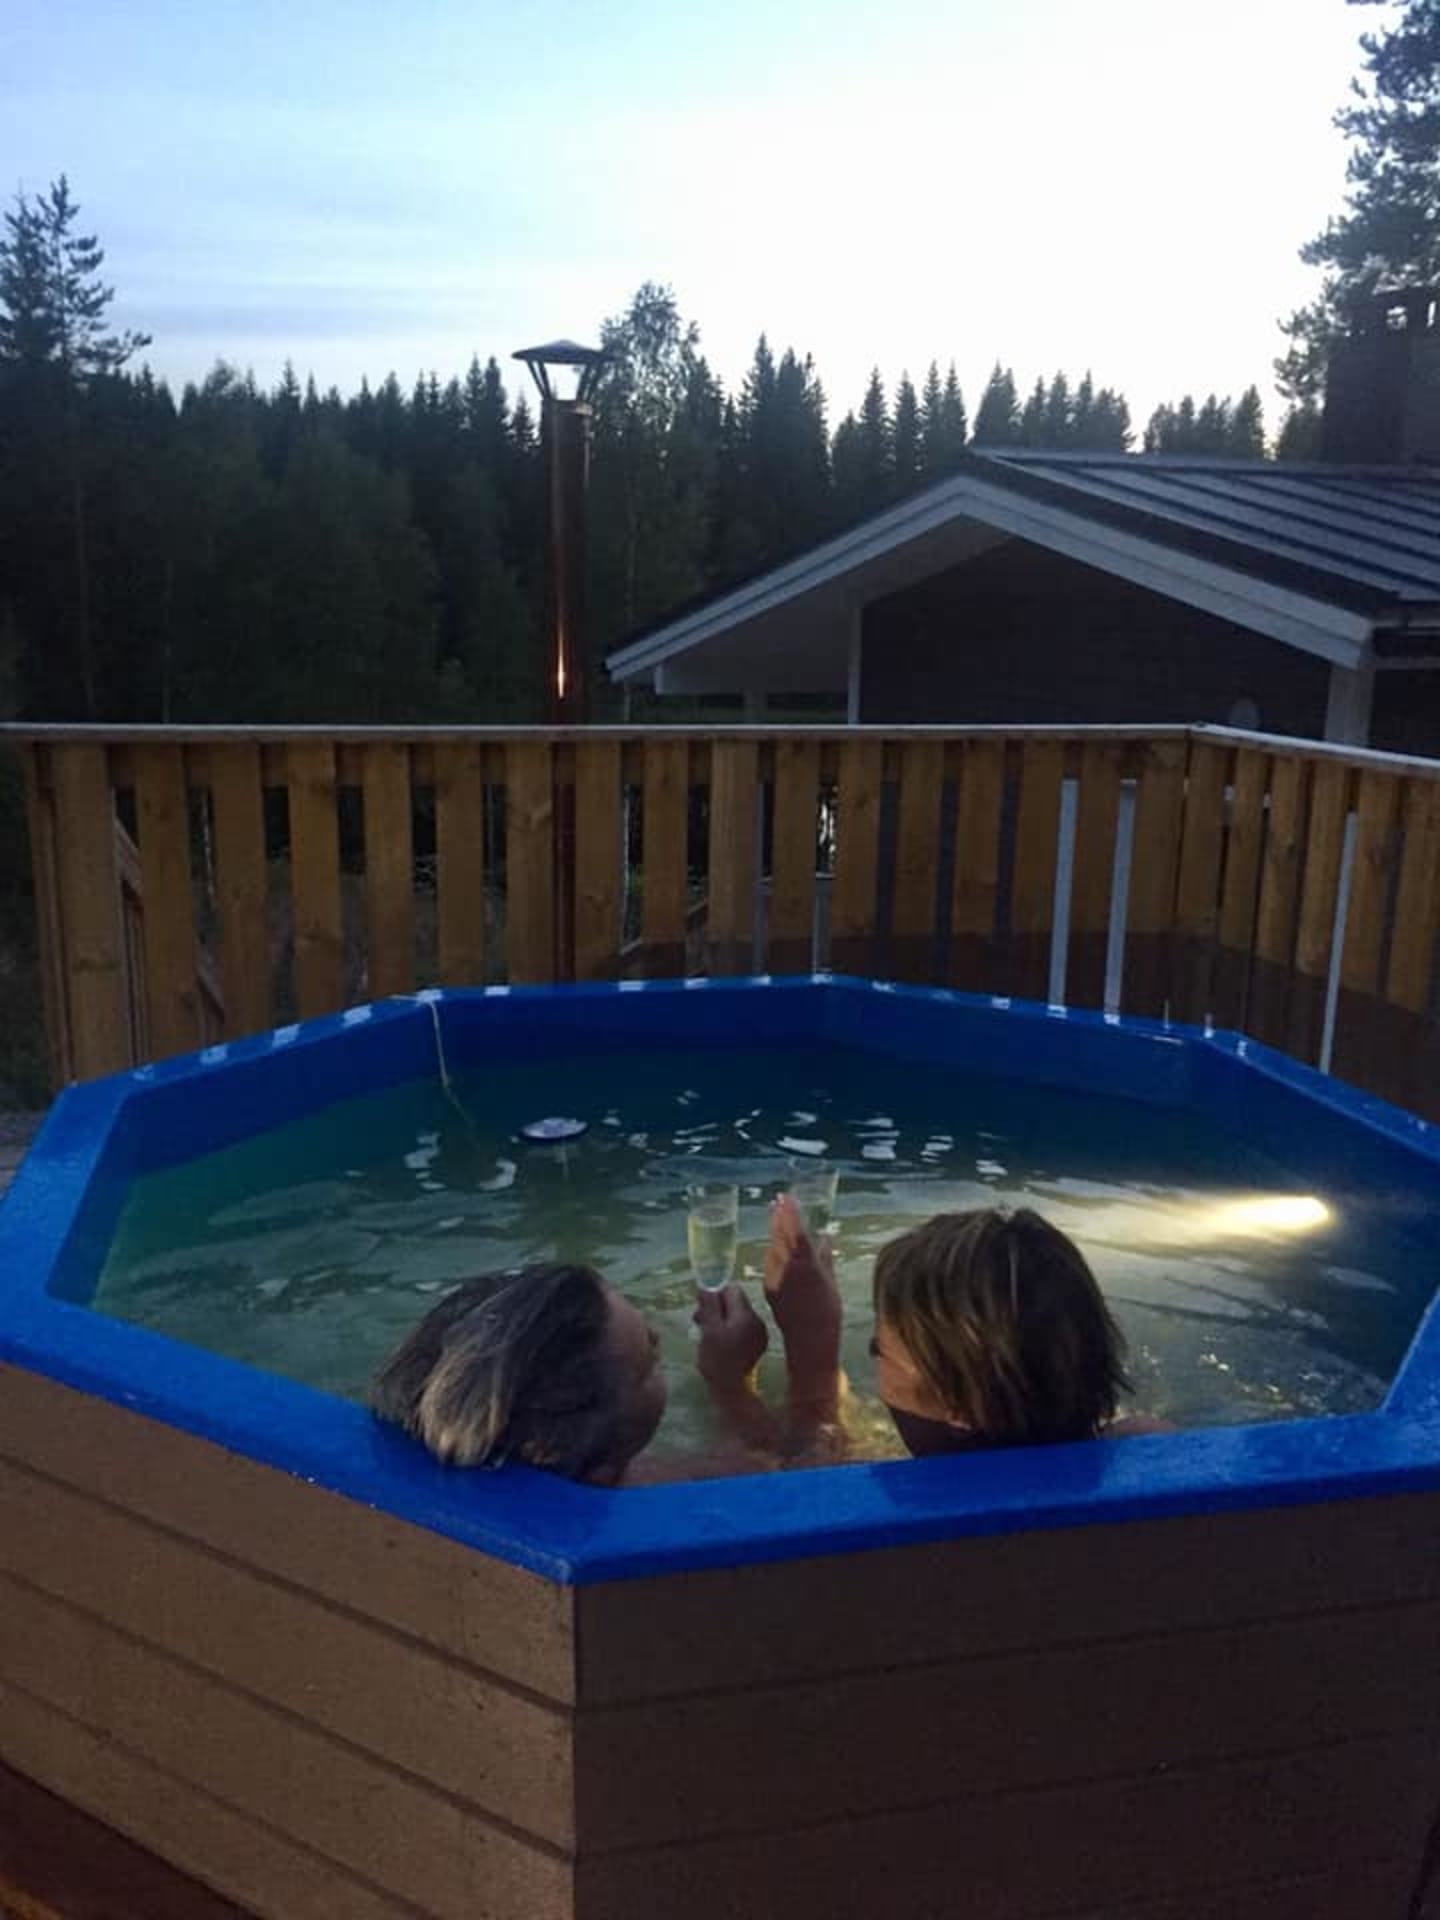 Hot tub in the evening.